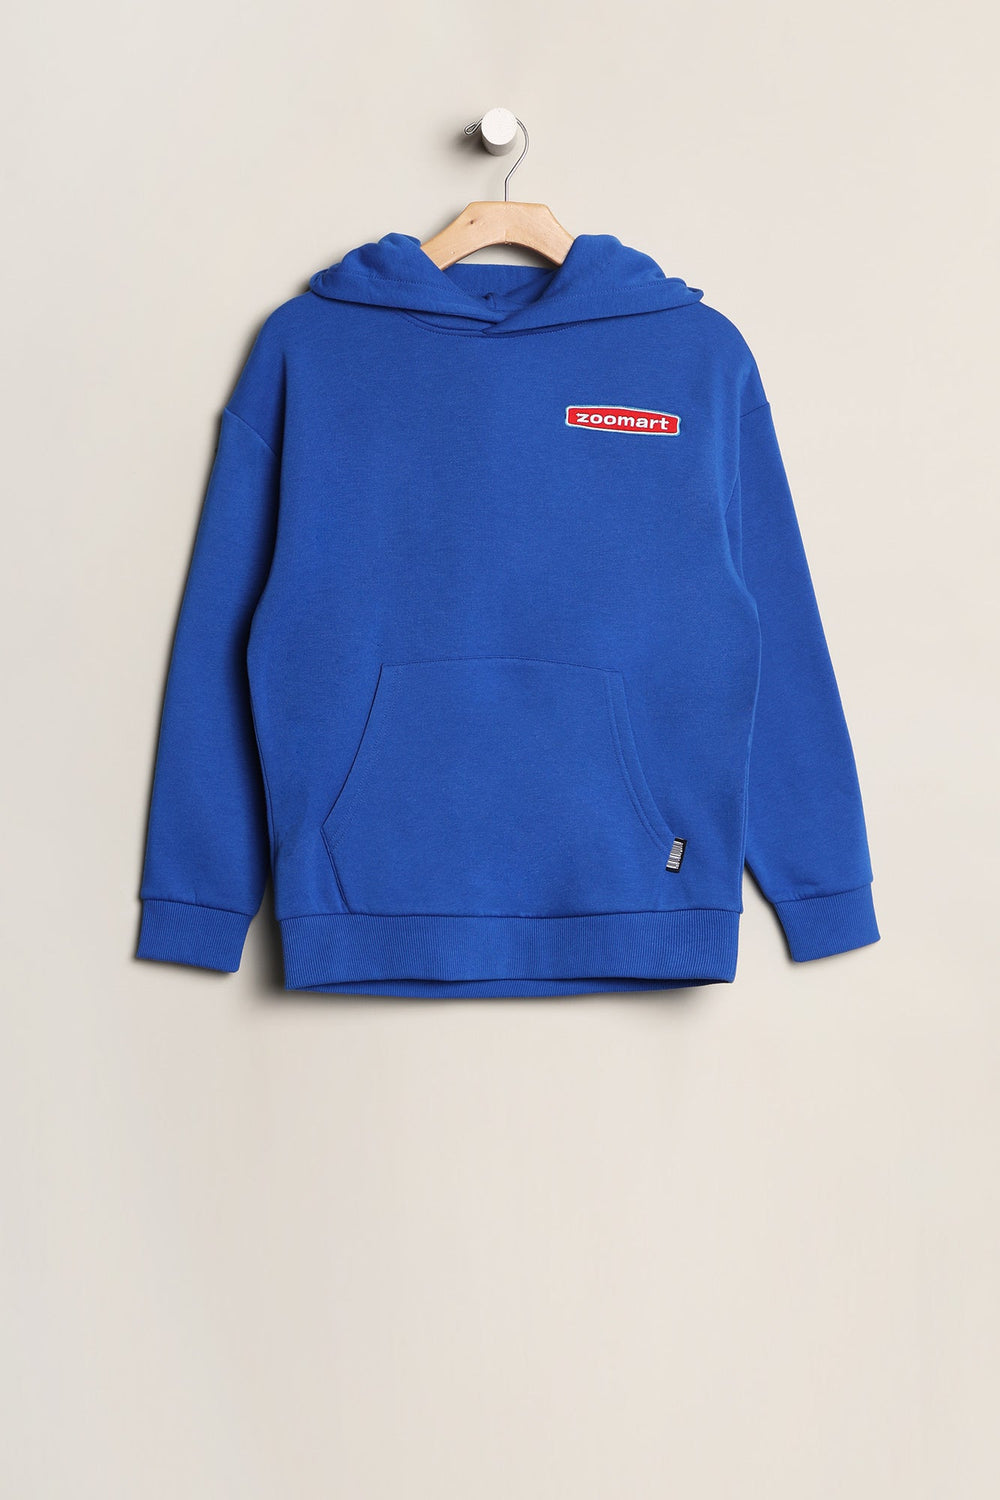 Zoo York Youth Zoomart Graphic Hoodie Blue